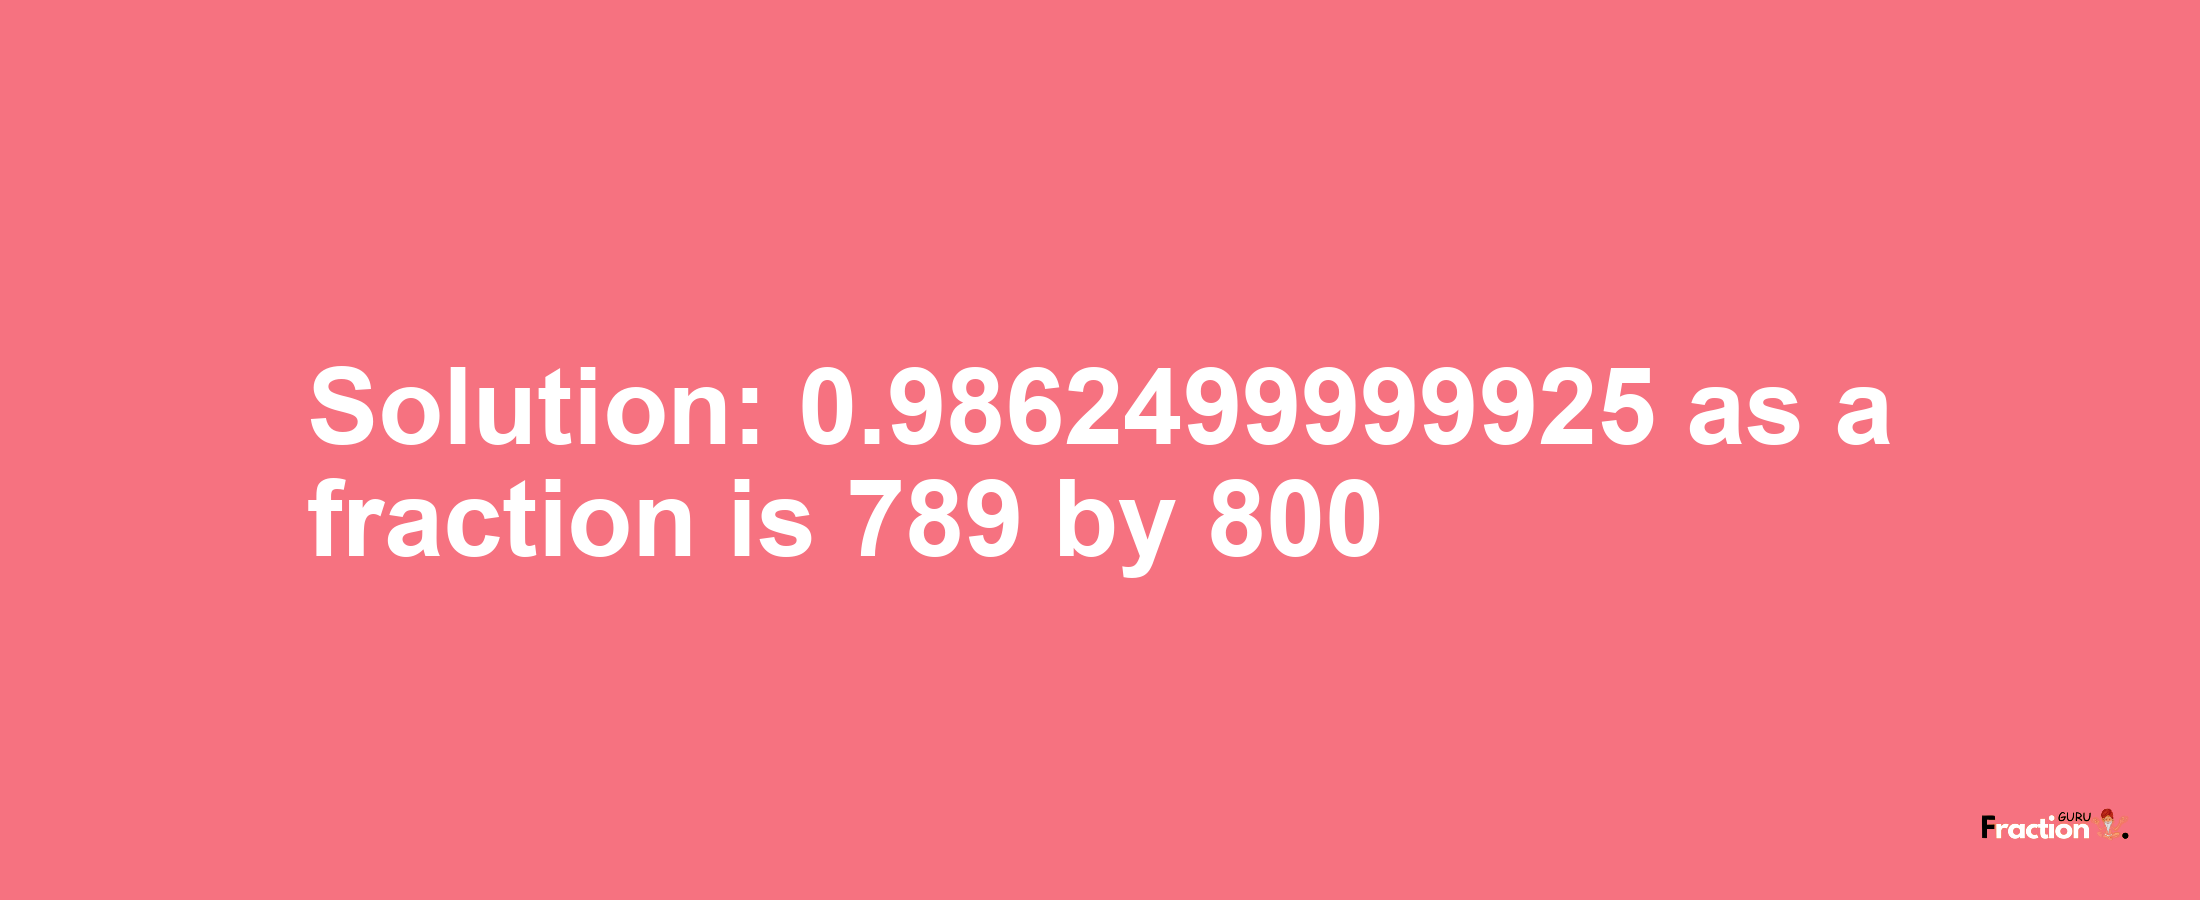 Solution:0.9862499999925 as a fraction is 789/800